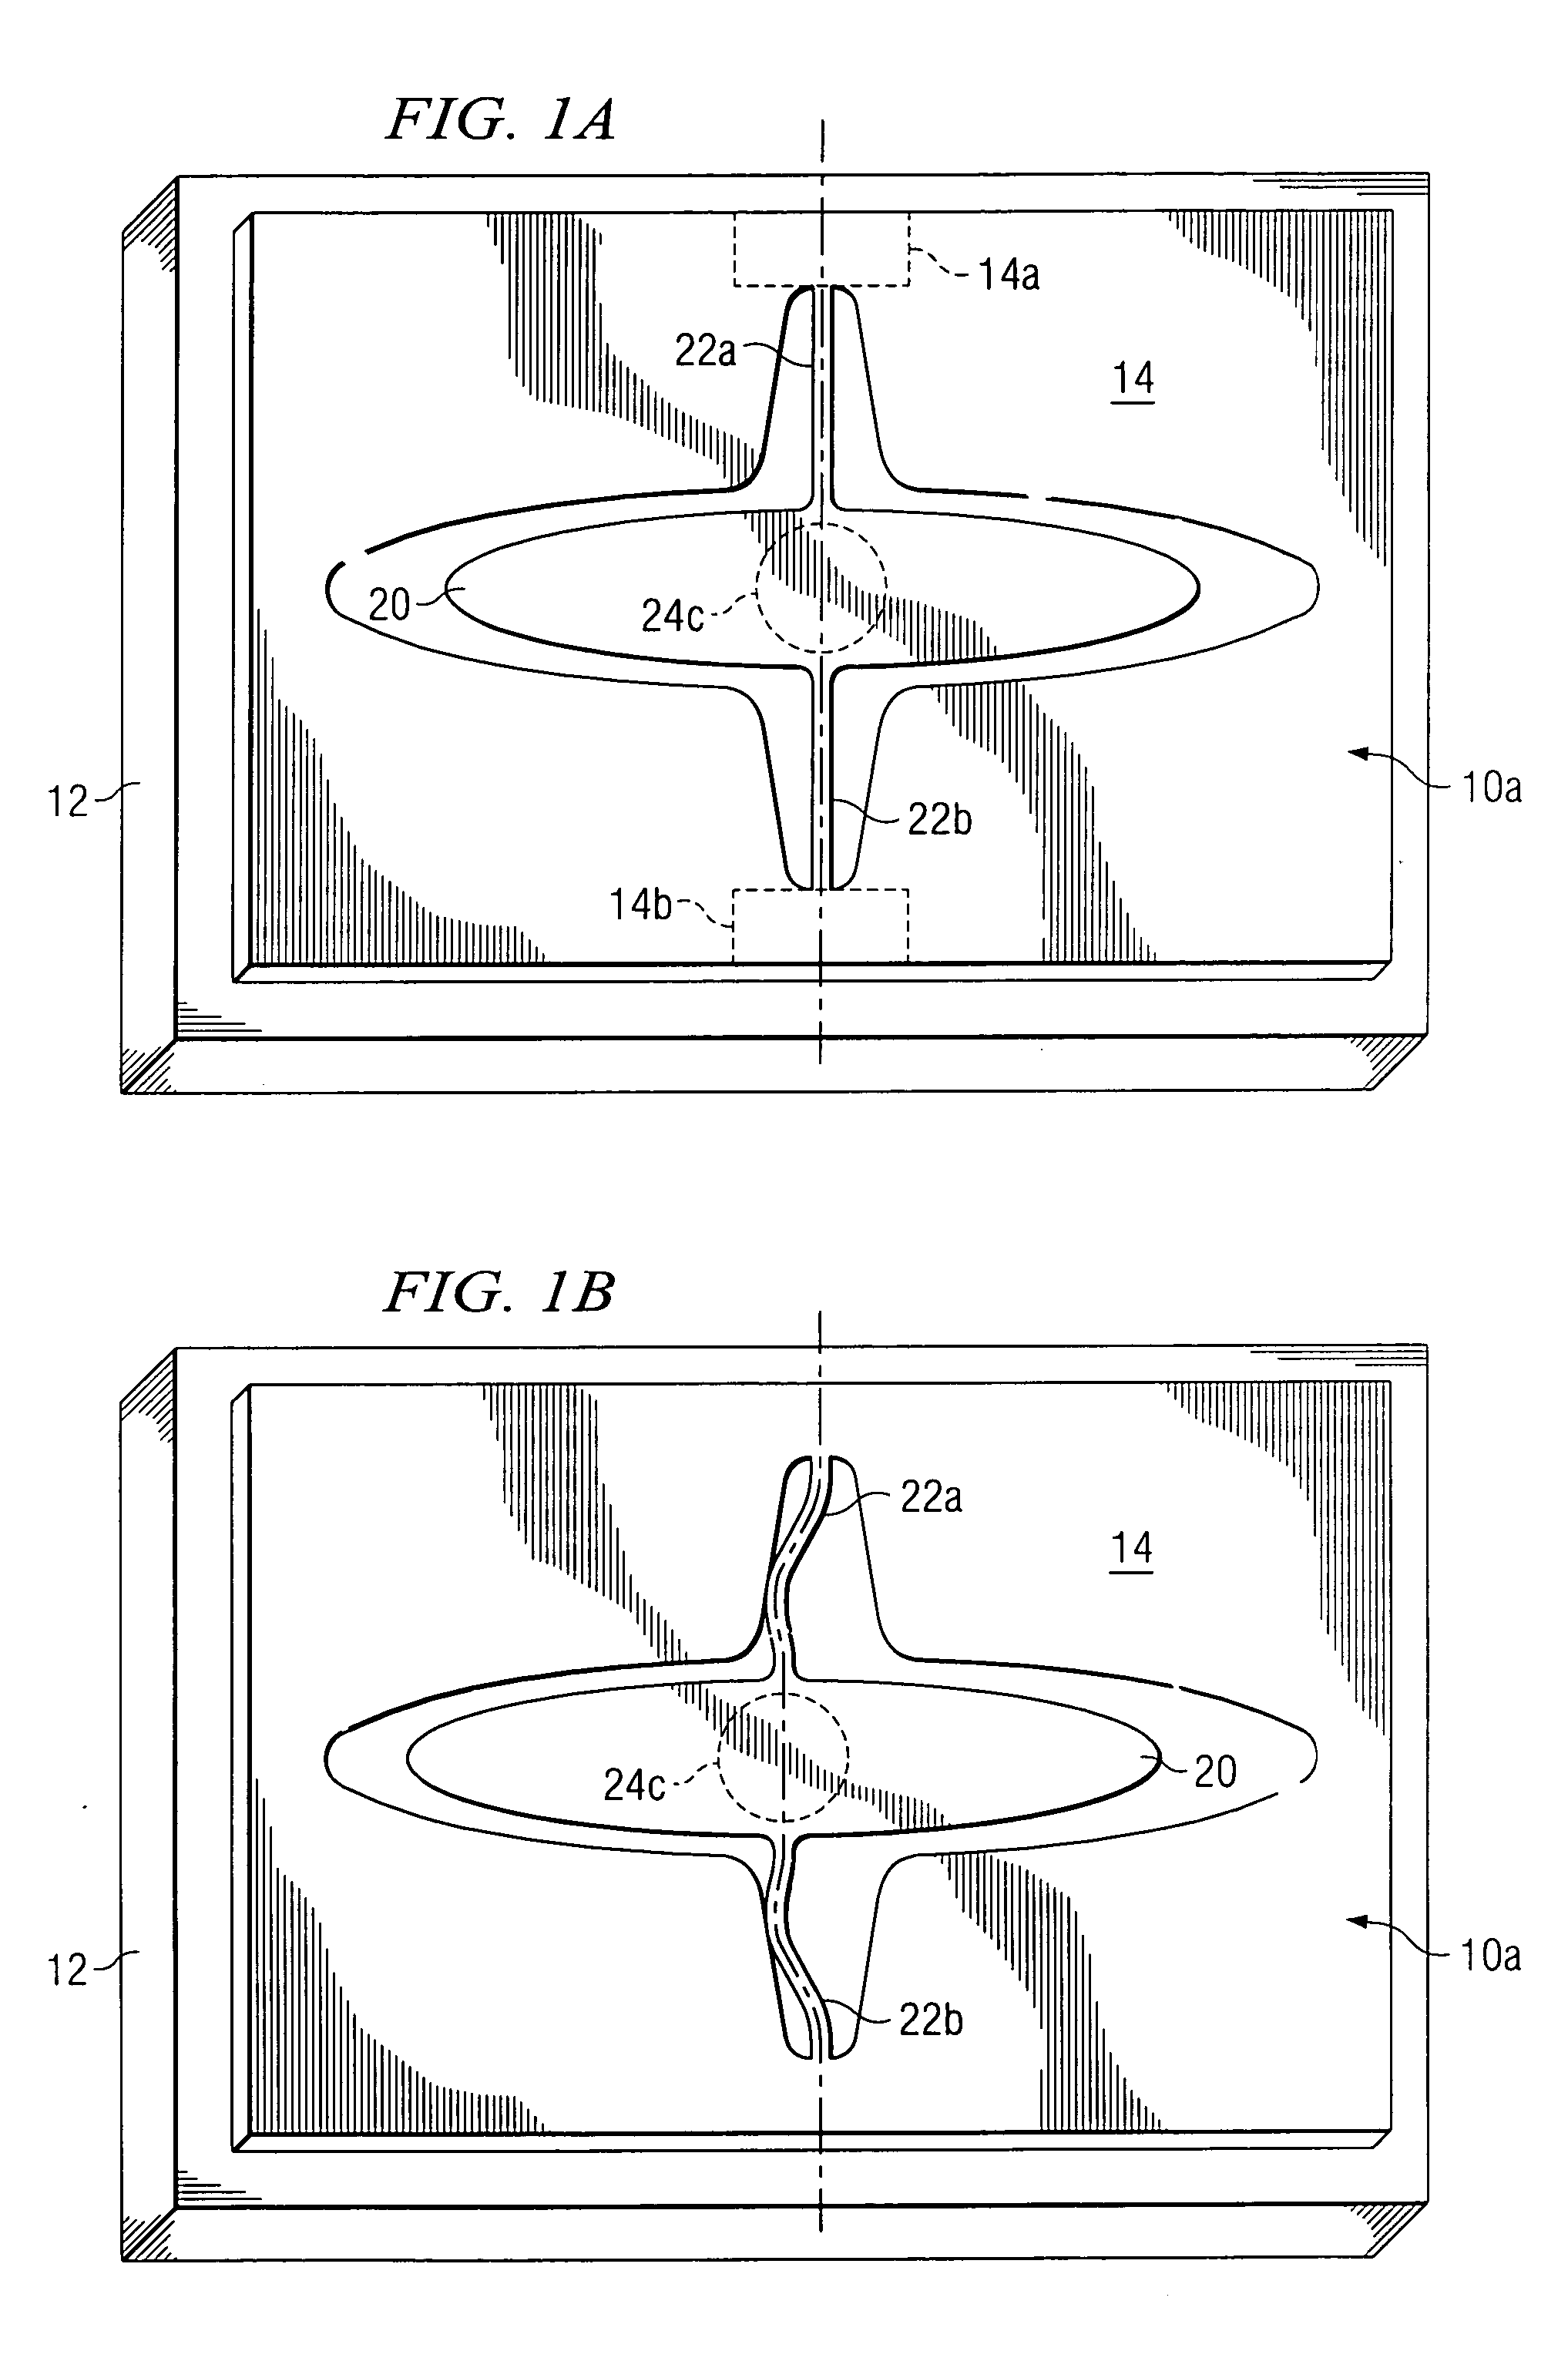 Structure and method for reducing thermal stresses on a torsional hinged device